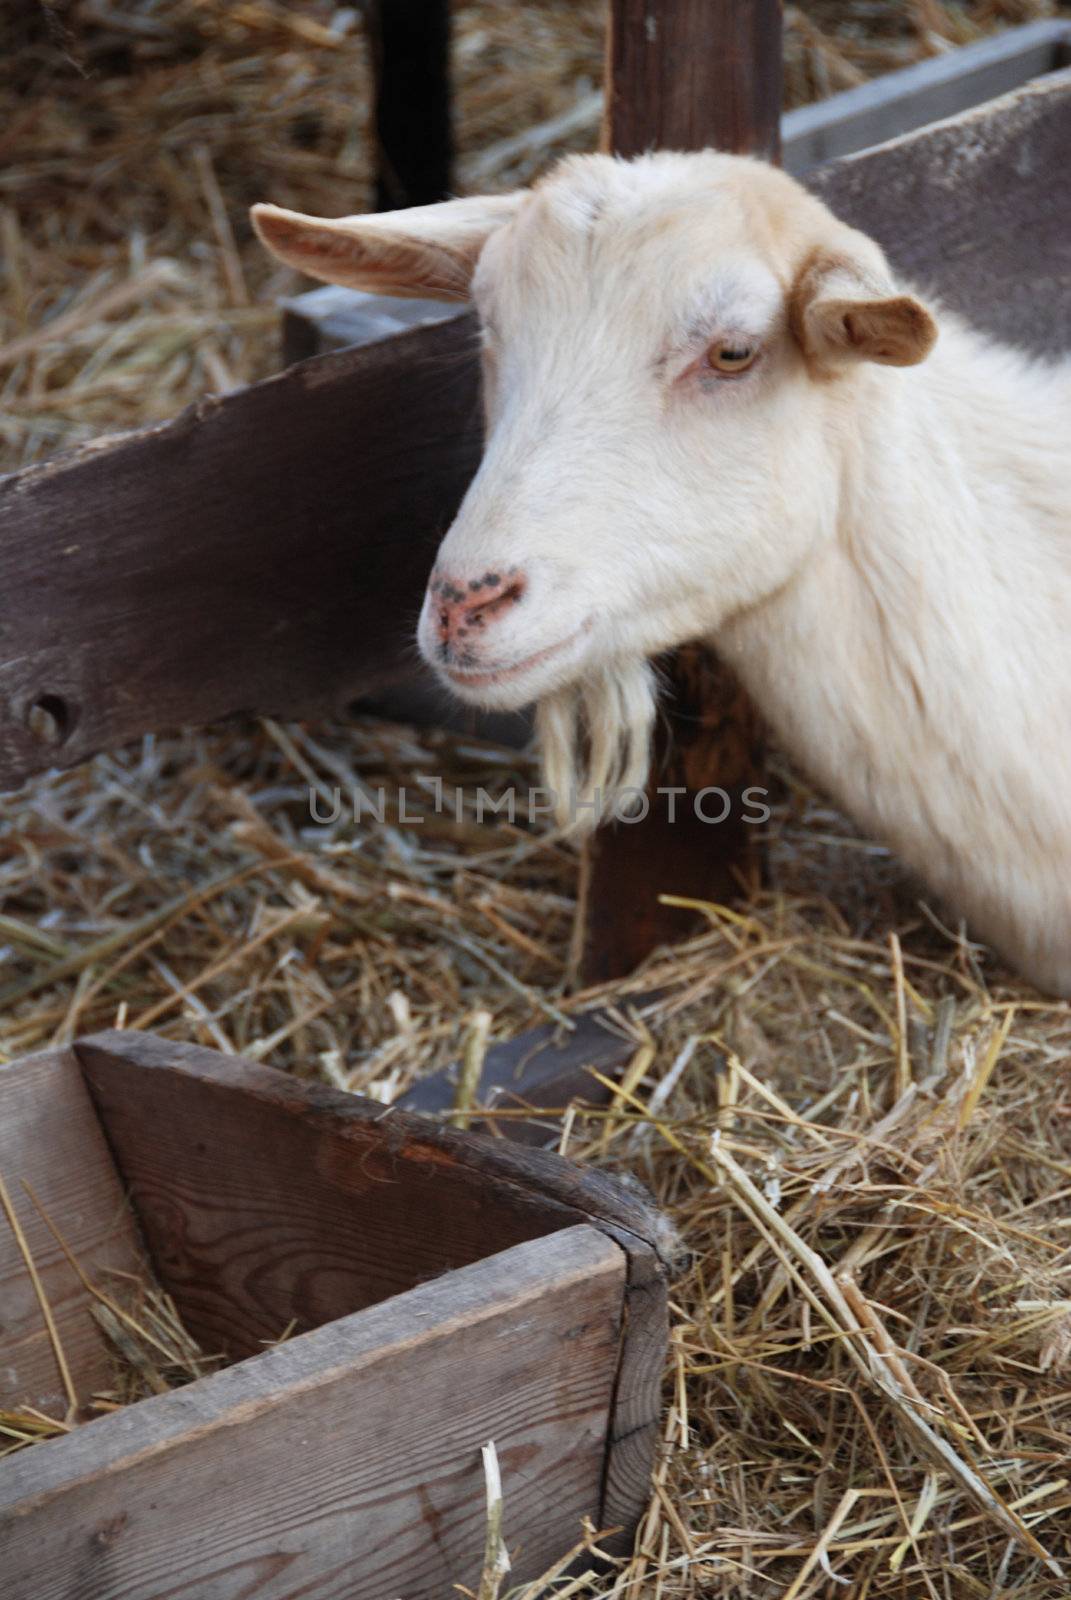 Goat is having a rest in the barn on the heap of straw